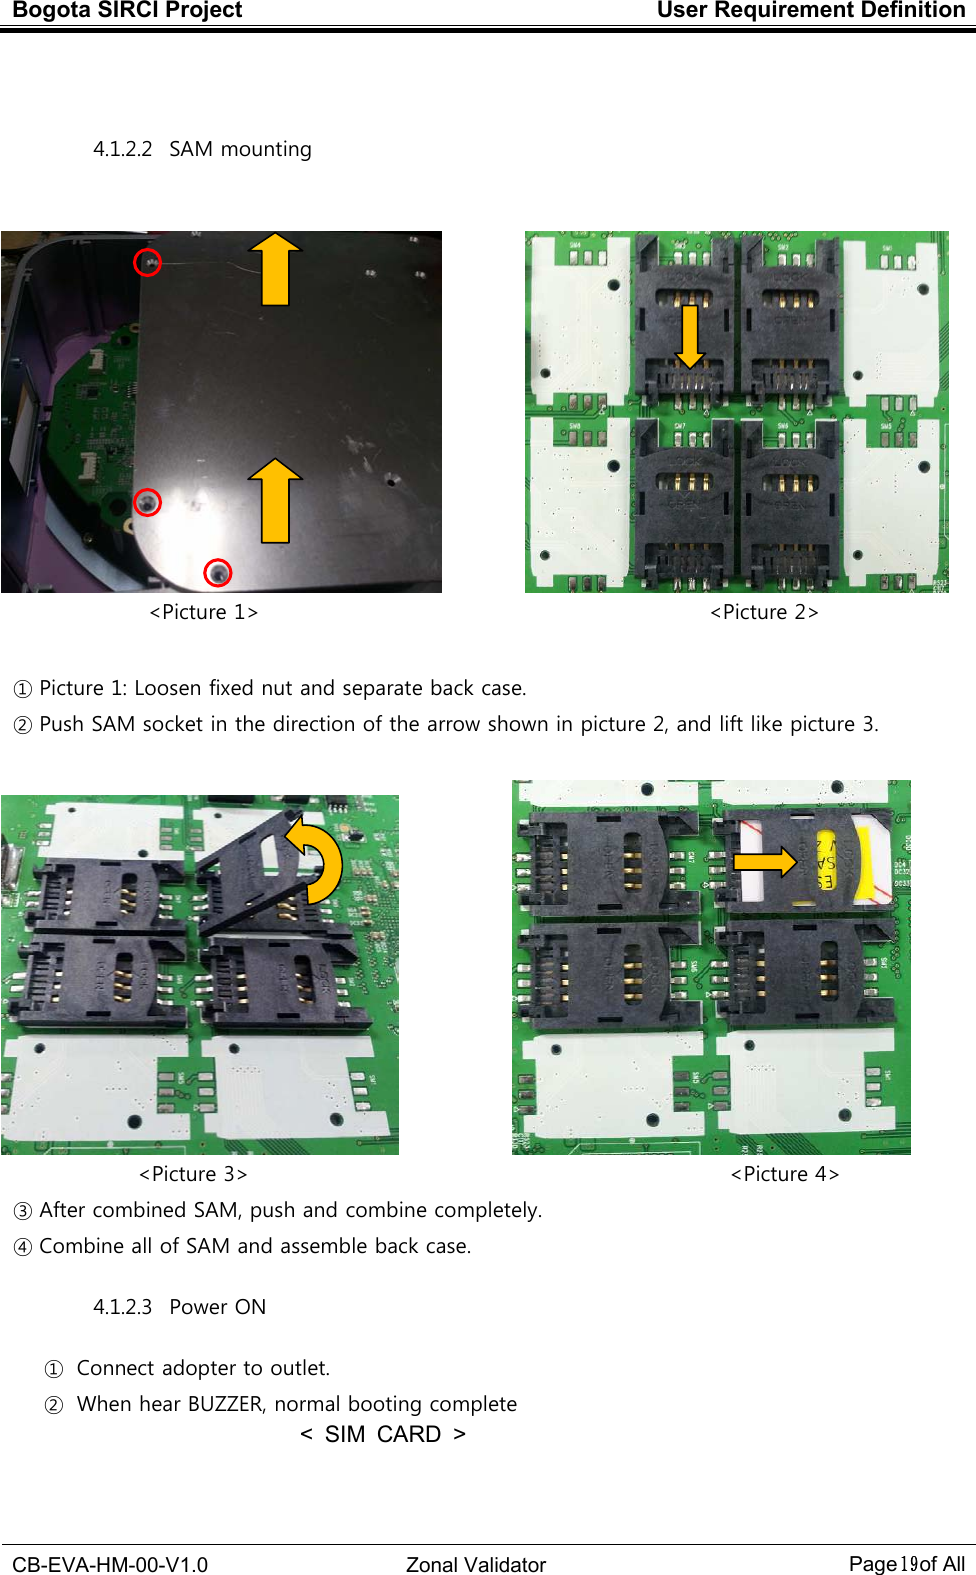 Bogota SIRCI Project  User Requirement Definition  CB-EVA-HM-00-V1.0  Zonal Validator Page１９１９１９１９ of All   4.1.2.2   SAM mounting                                              &lt;Picture 1&gt;                                                                                      &lt;Picture 2&gt;             ① Picture 1: Loosen fixed nut and separate back case.   ② Push SAM socket in the direction of the arrow shown in picture 2, and lift like picture 3.                                       &lt;Picture 3&gt;                                                                                        &lt;Picture 4&gt; ③ After combined SAM, push and combine completely. ④ Combine all of SAM and assemble back case. 4.1.2.3   Power ON   ① Connect adopter to outlet. ② When hear BUZZER, normal booting complete &lt;  SIM  CARD  &gt;    